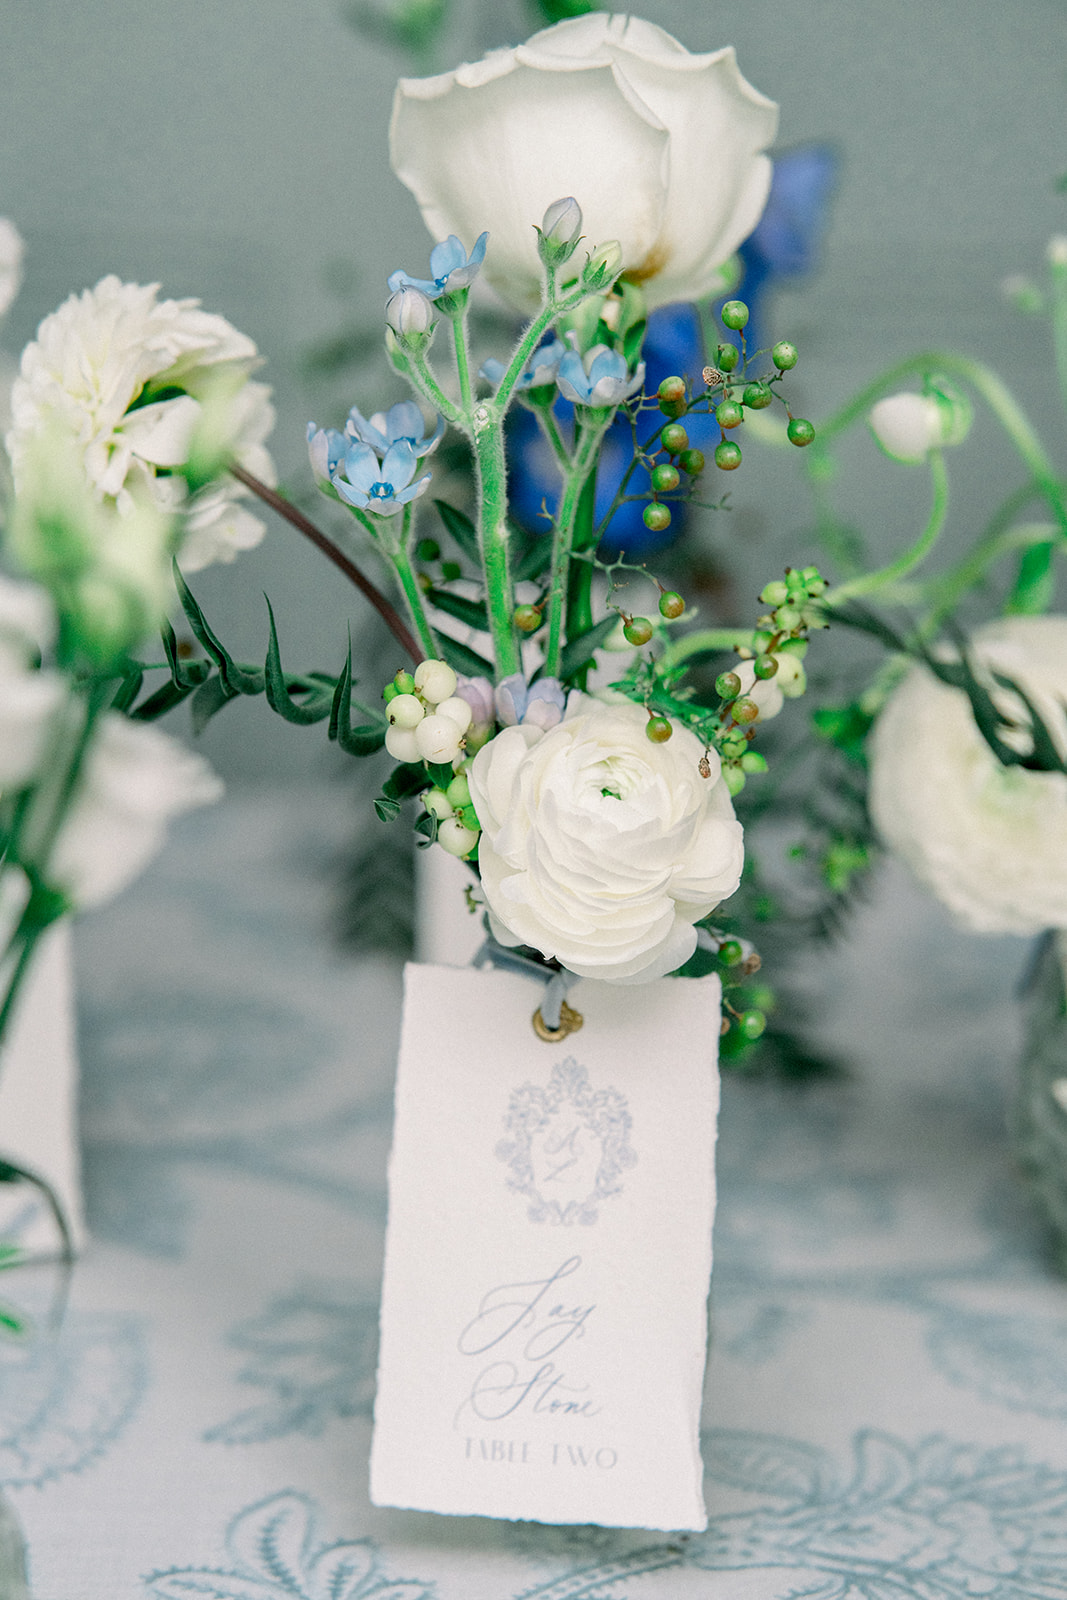 Floral arrangement in blue and ivory hues by Frog Prince Weddings, adorning a destination wedding aisle in Ireland's Cas